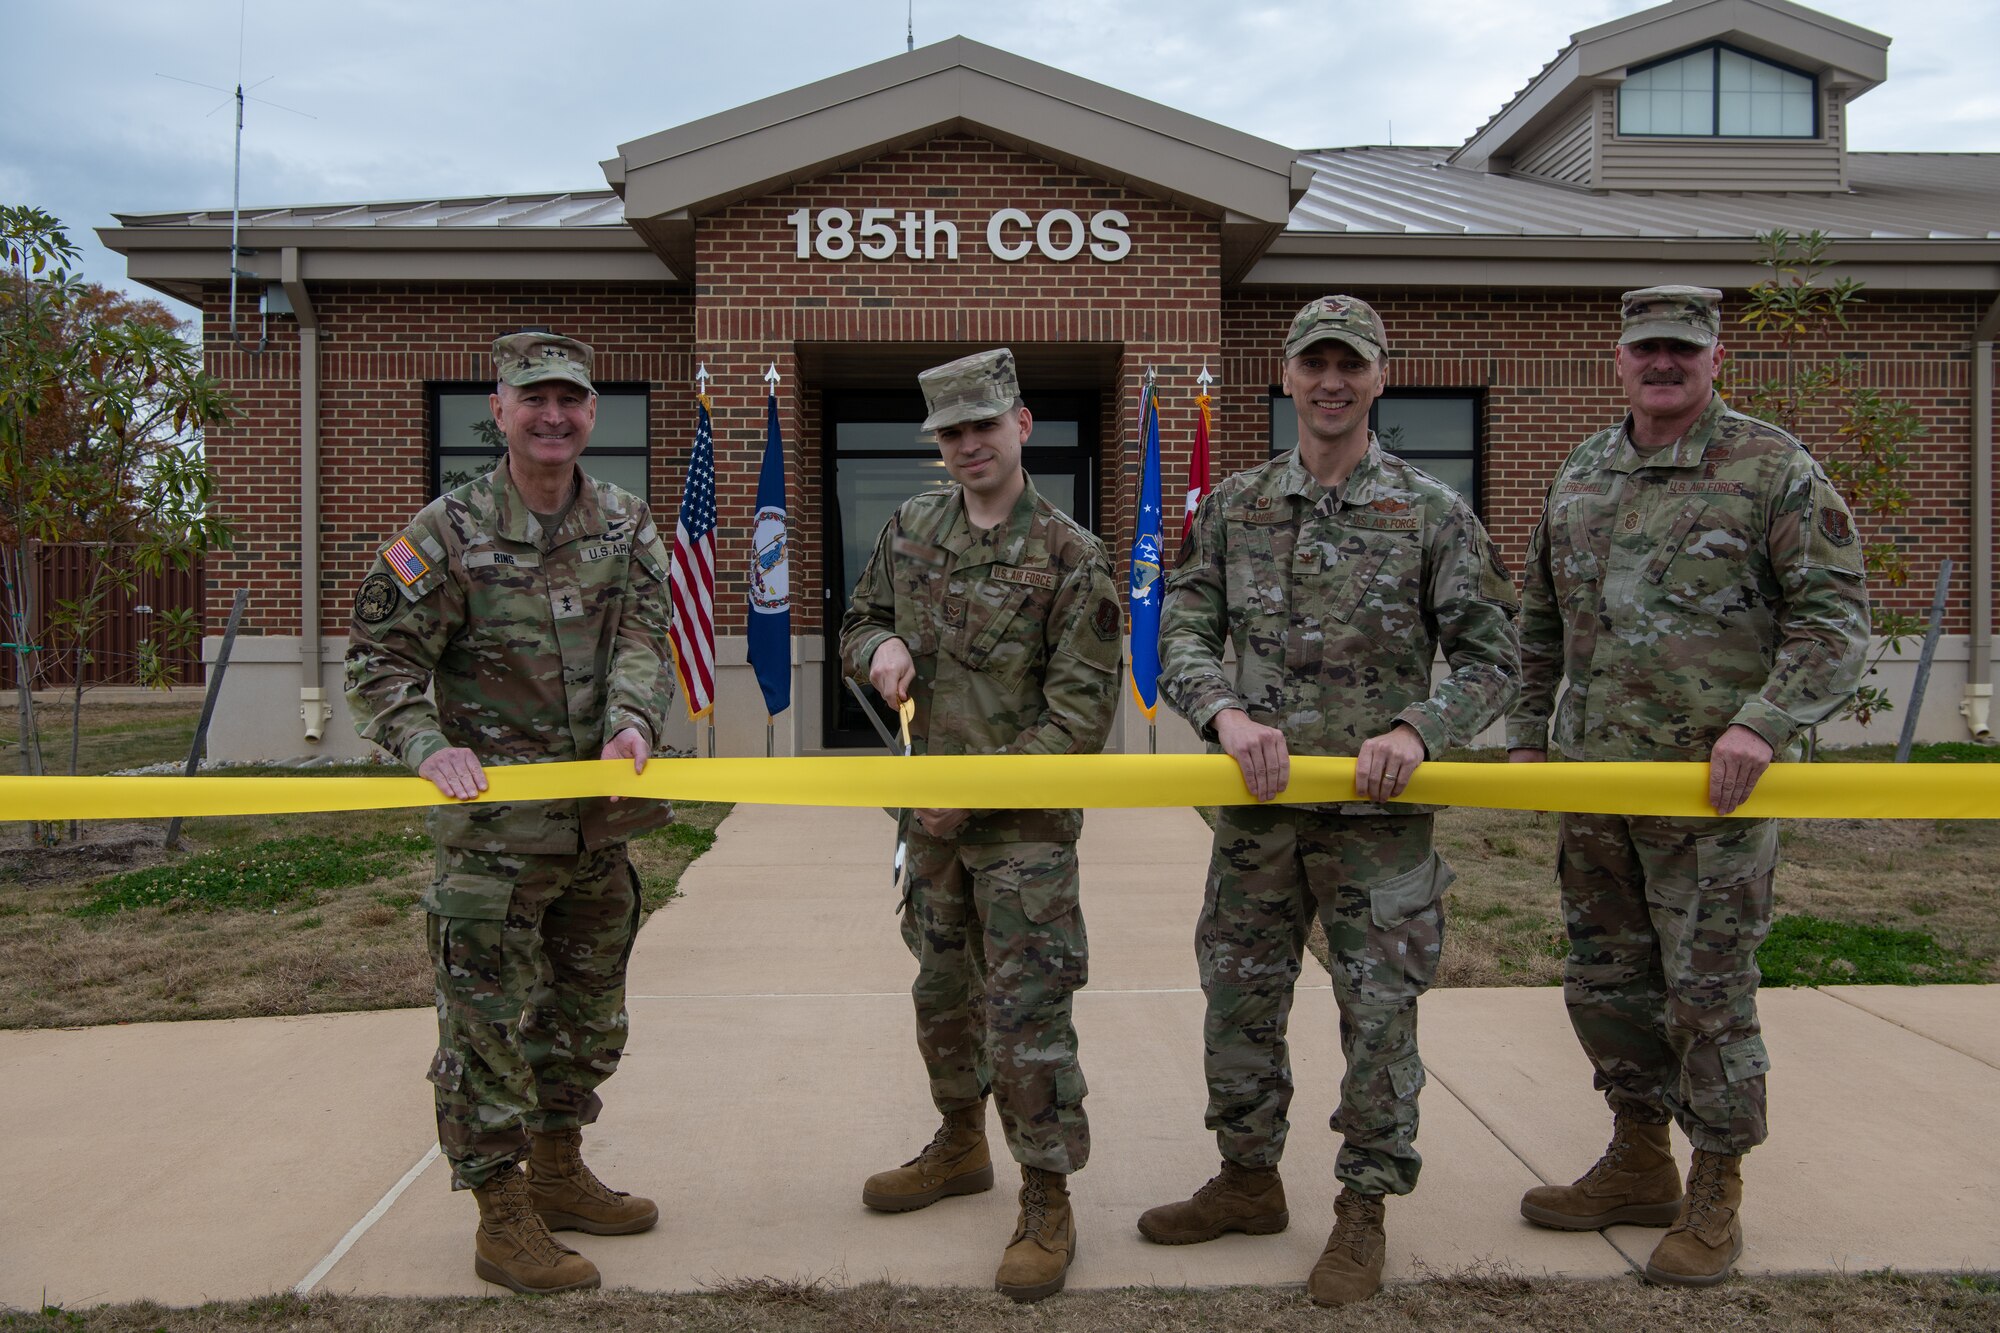 Four military members holding ribbon, one cutting with scissors.